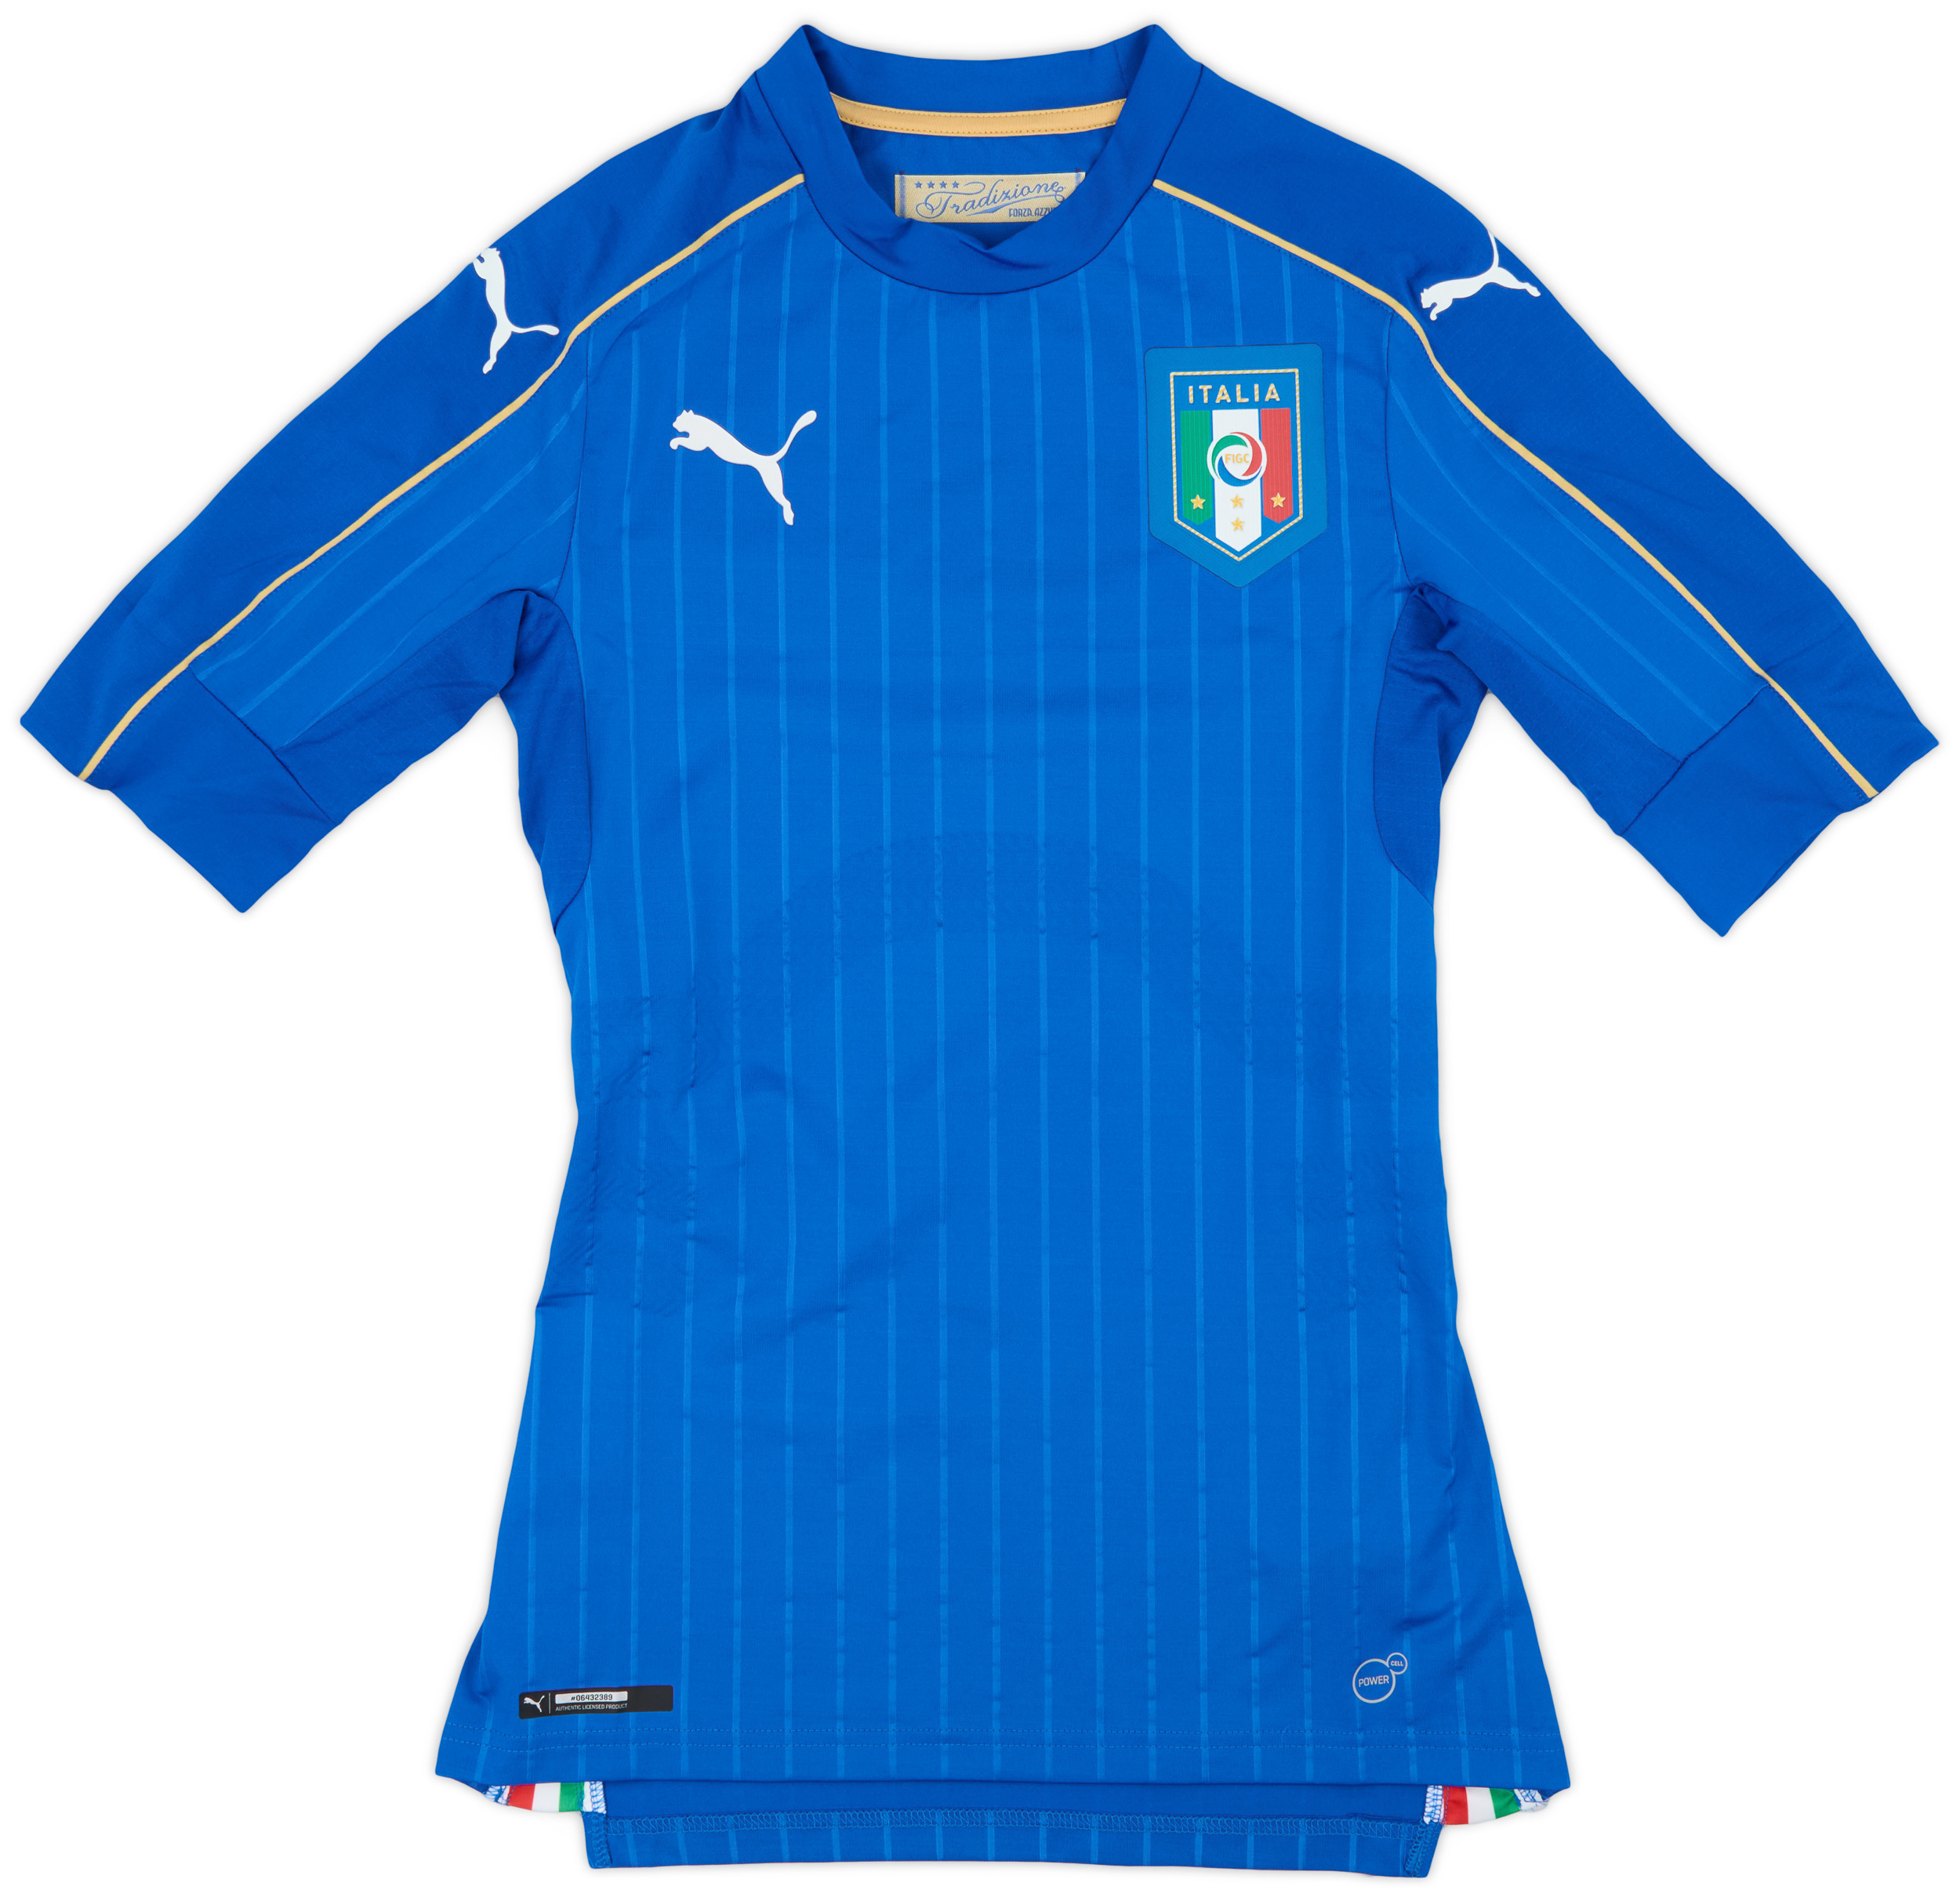 2016-17 Italy Authentic Home Shirt (ACTV Fit) - 9/10 - ()